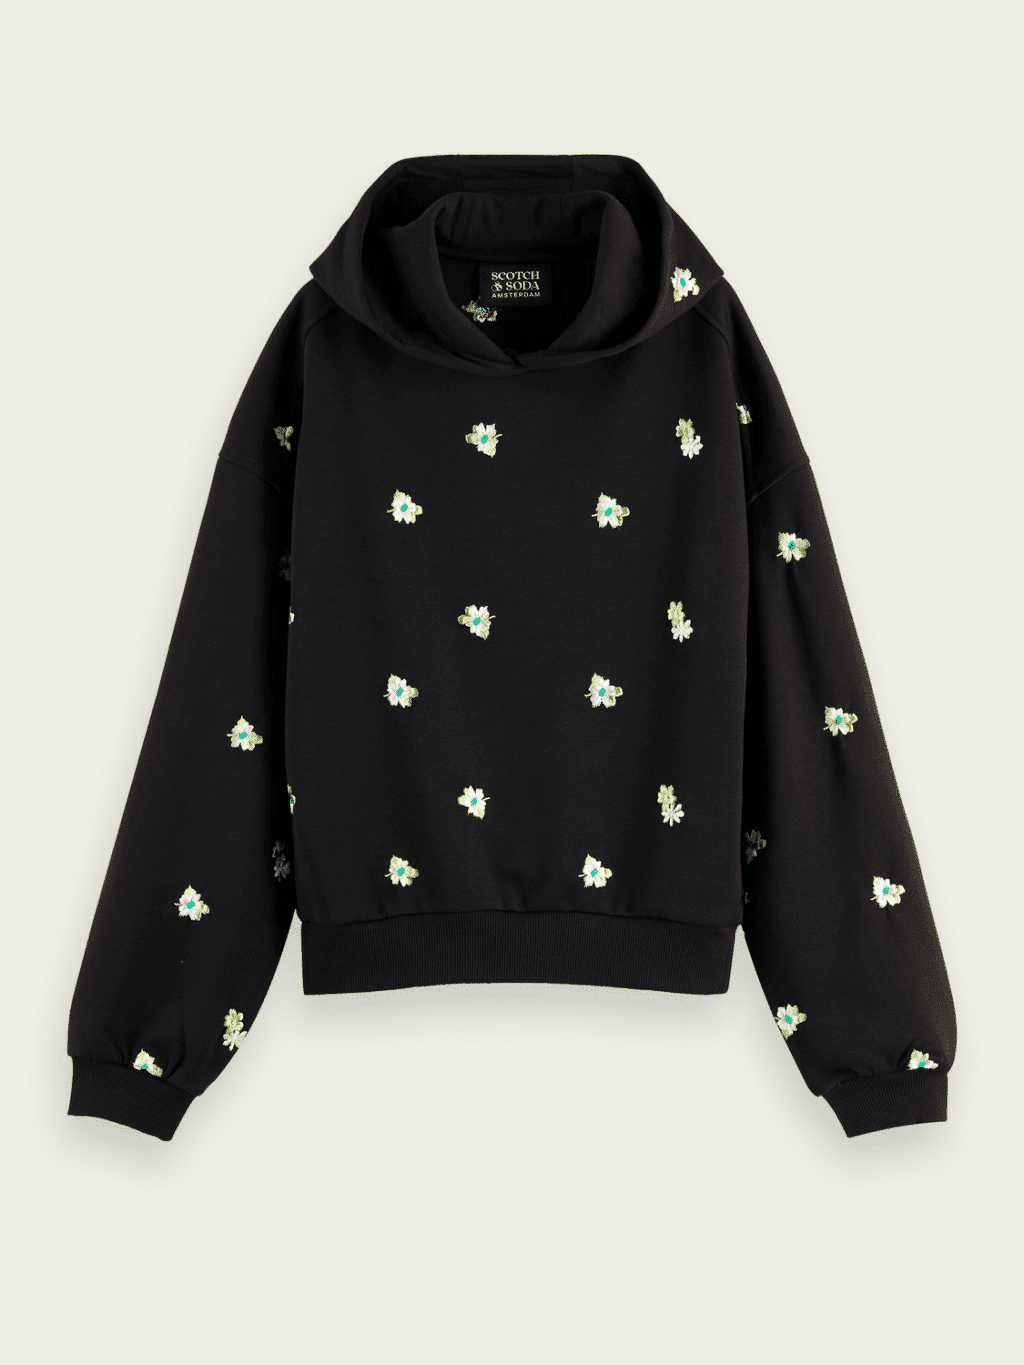 Spring summer 2022 SCOTCH & SODA EMBROIDERED HOODIE